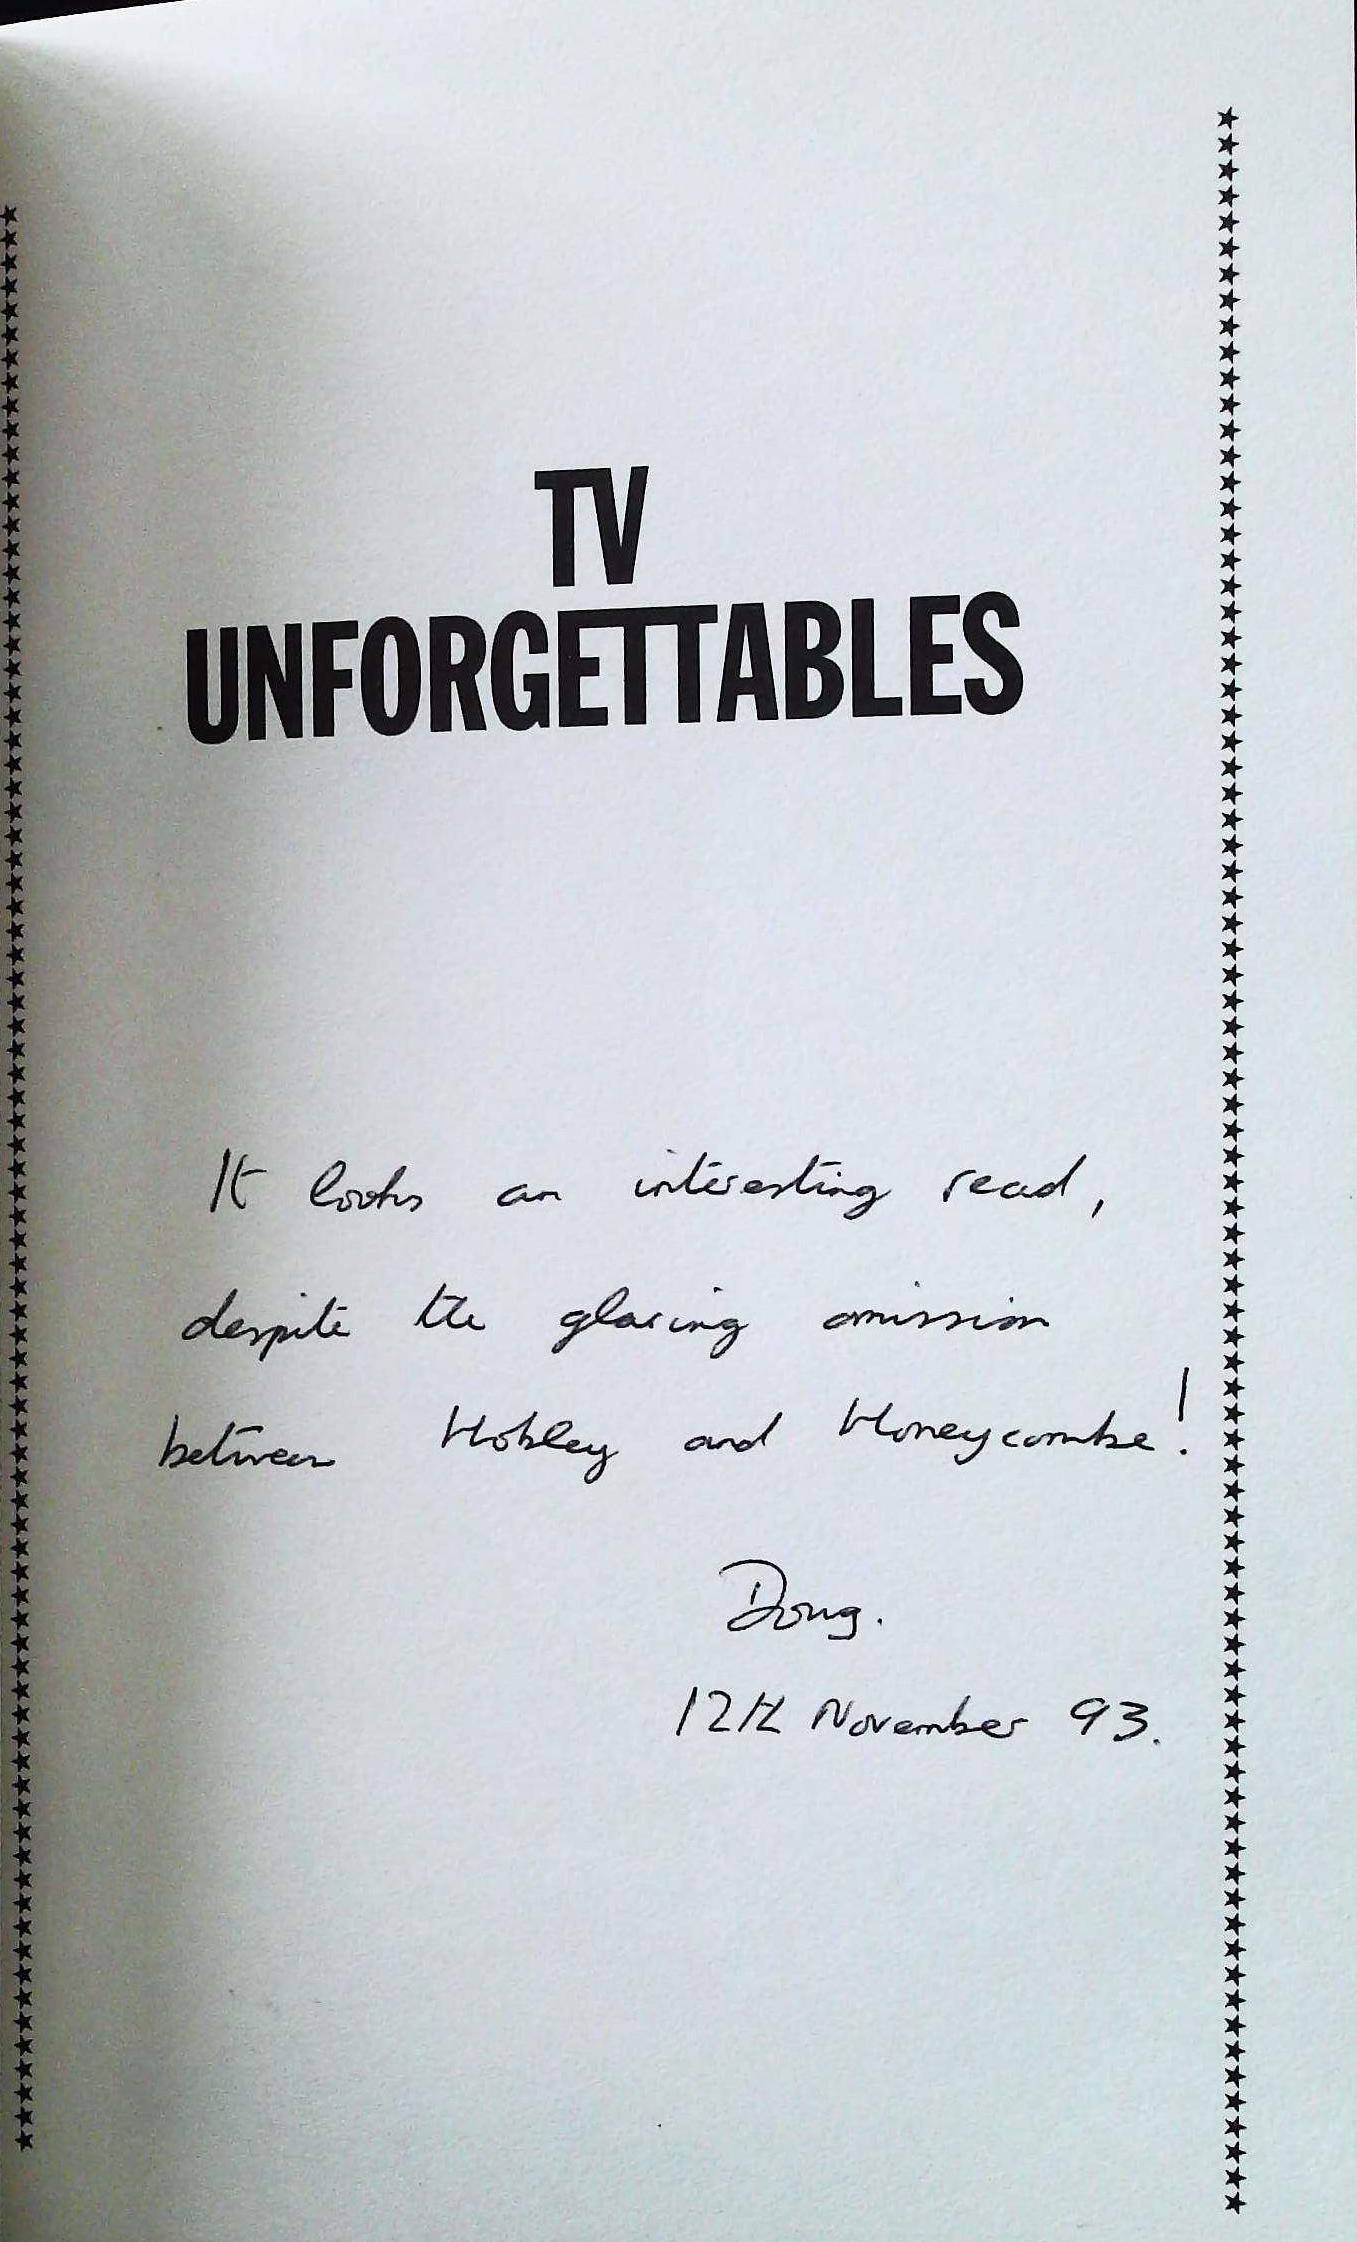 TV Unforgettable paperback book by Anthony and Deborah Hayward. Published 1993 Guinness Publishing - Image 3 of 4